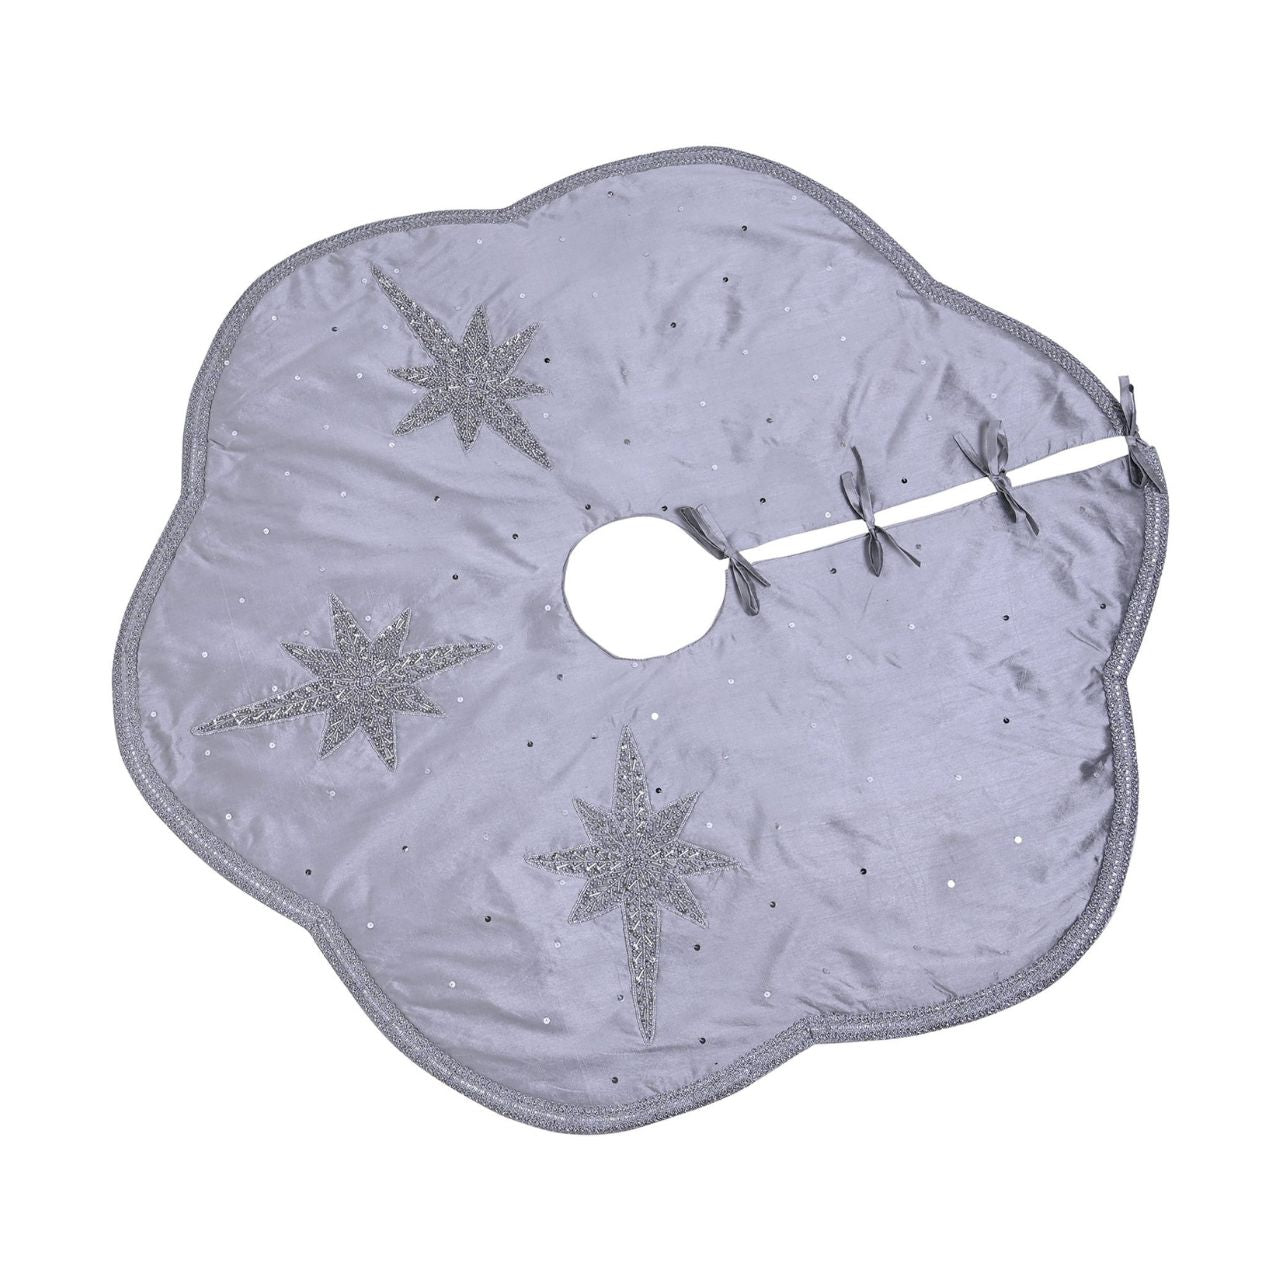 Christmas Tree Skirt with Scalloped Edge Silver Star Hand Embellished  A silver star hand embellished Christmas tree skirt with scalloped edge.  This standout accessory wraps itself around Christmas trees to accentuate its decoration.